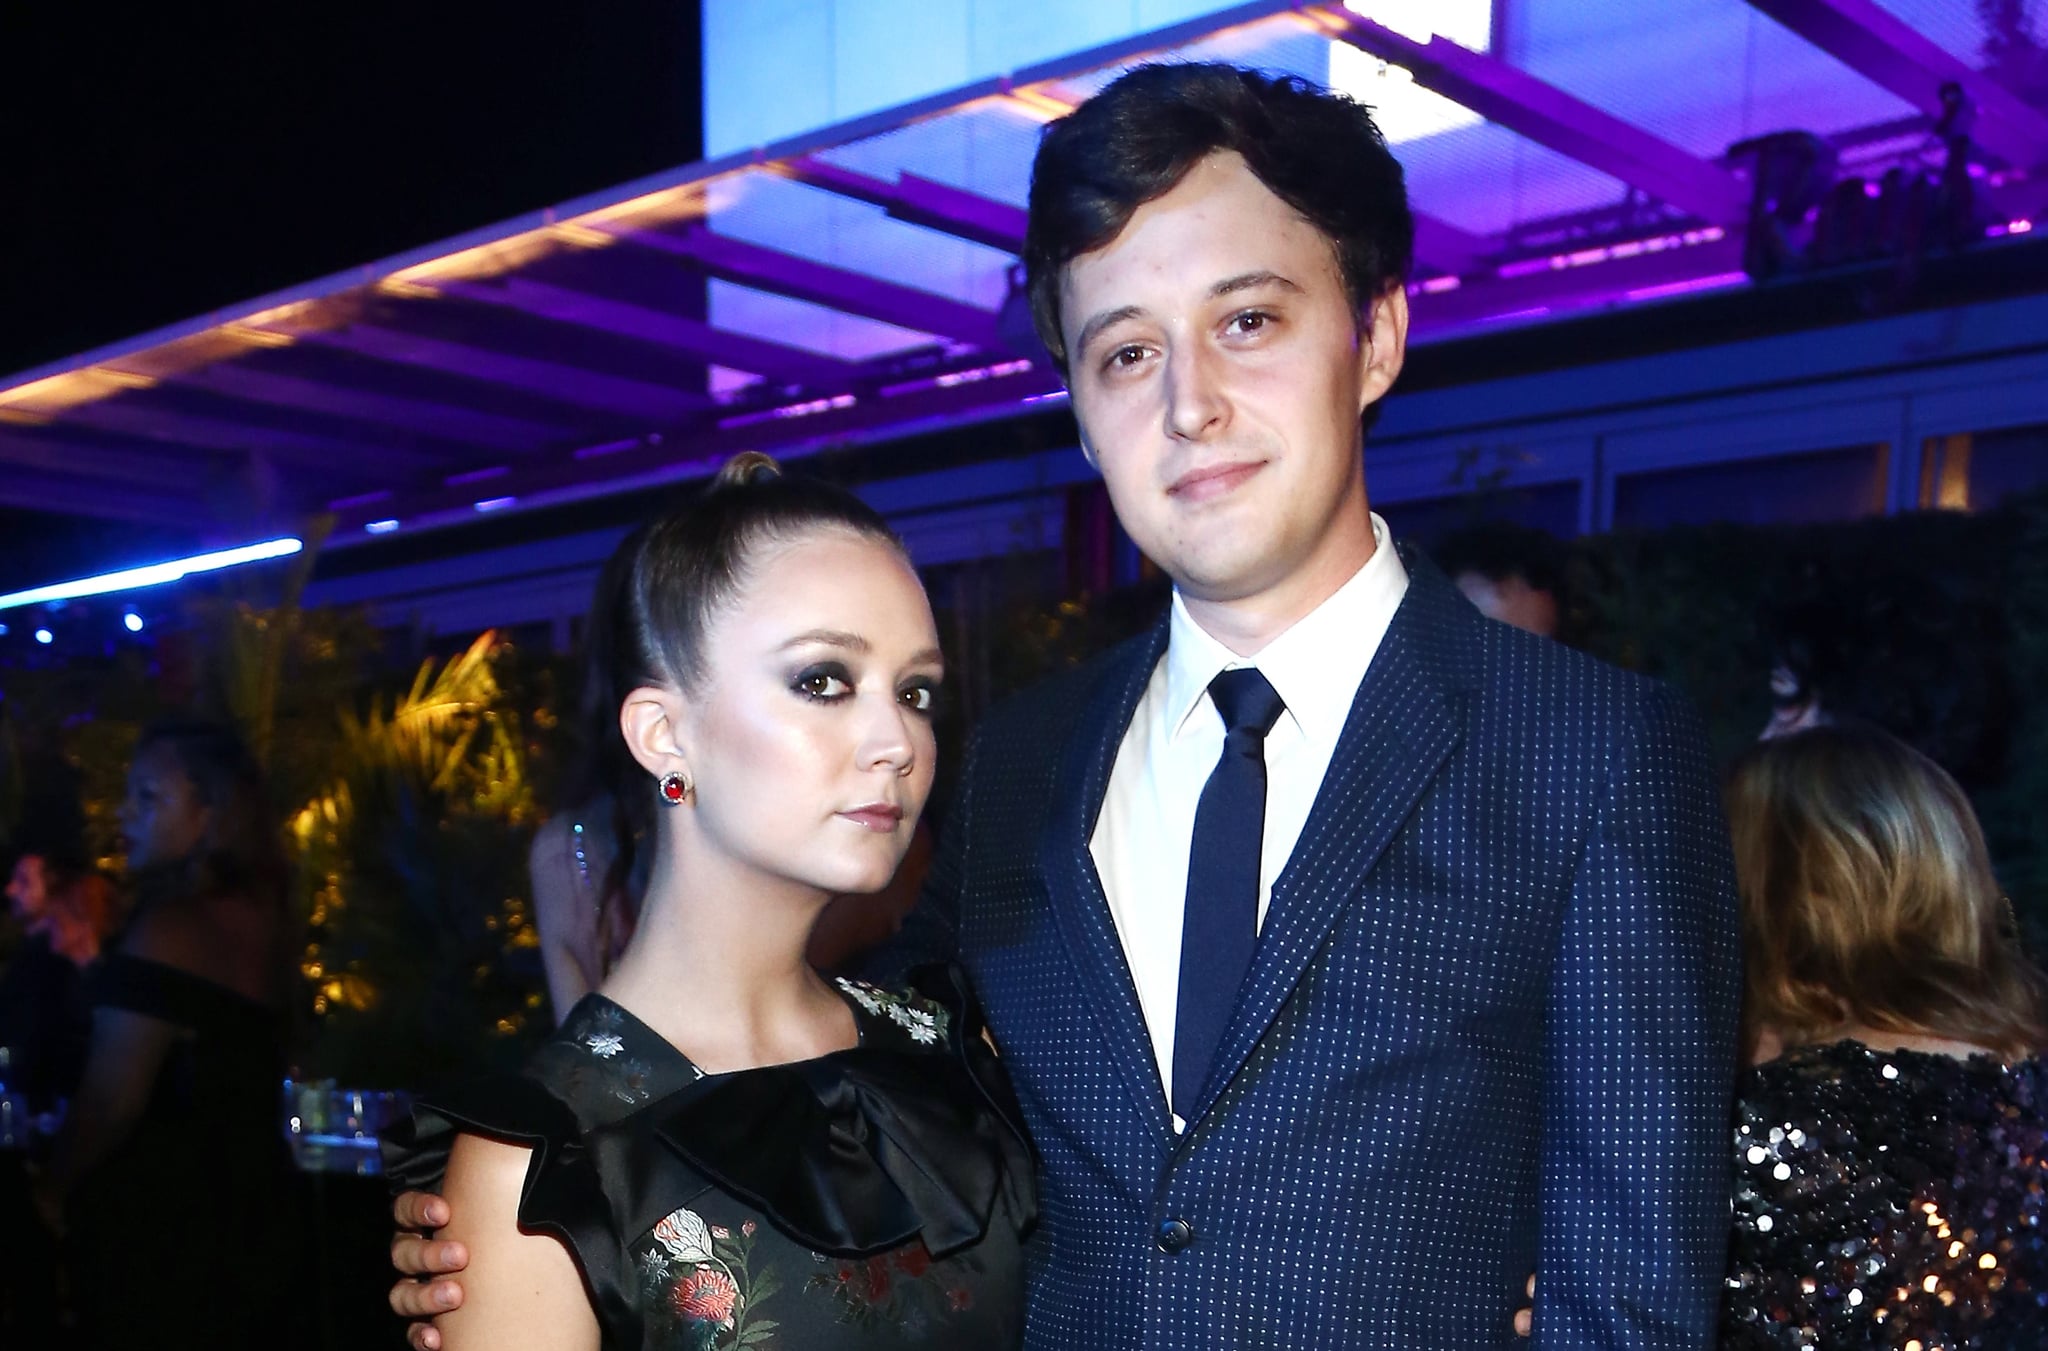 LOS ANGELES, CA - NOVEMBER 03:  Actors Billie Lourd (L) and Austen Rydell attend 2018 LACMA Art + Film Gala honouring Catherine Opie and Guillermo del Toro presented by Gucci at LACMA on November 3, 2018 in Los Angeles, California.  (Photo by Tommaso Boddi/Getty Images for LACMA)